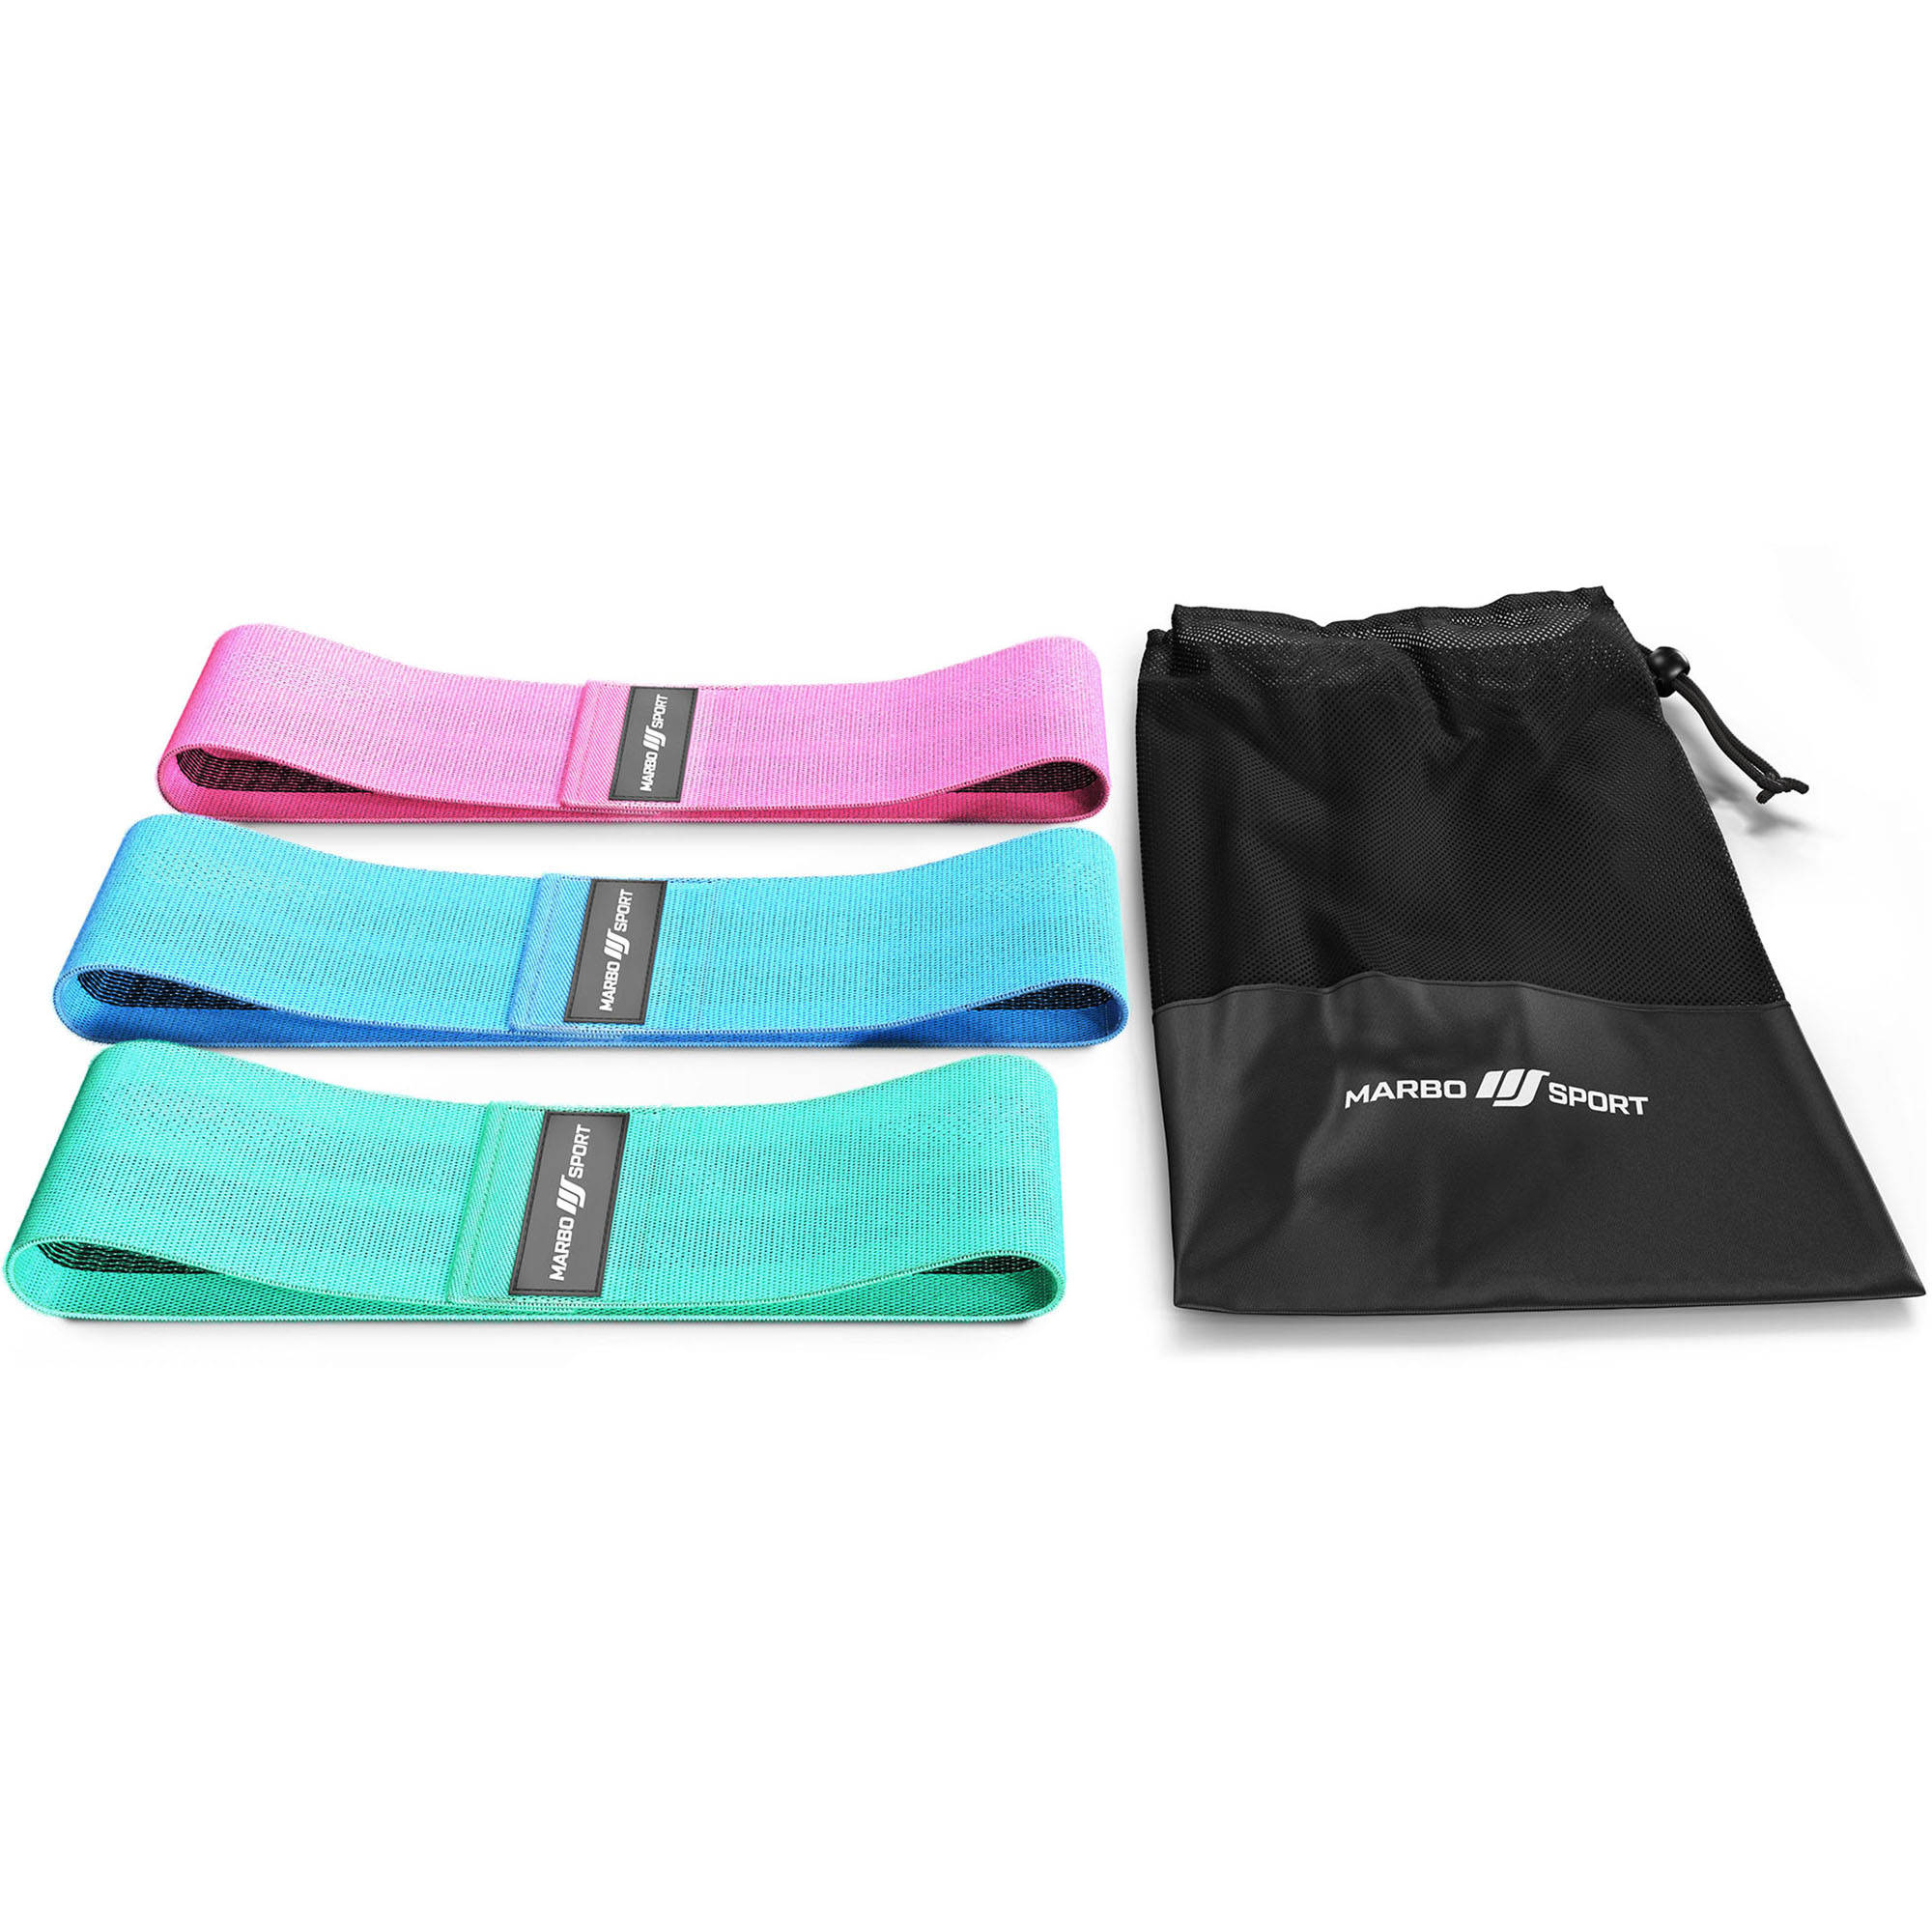 Fabric Resistance Bands Set of 3 Premium Quality Resistance Bands